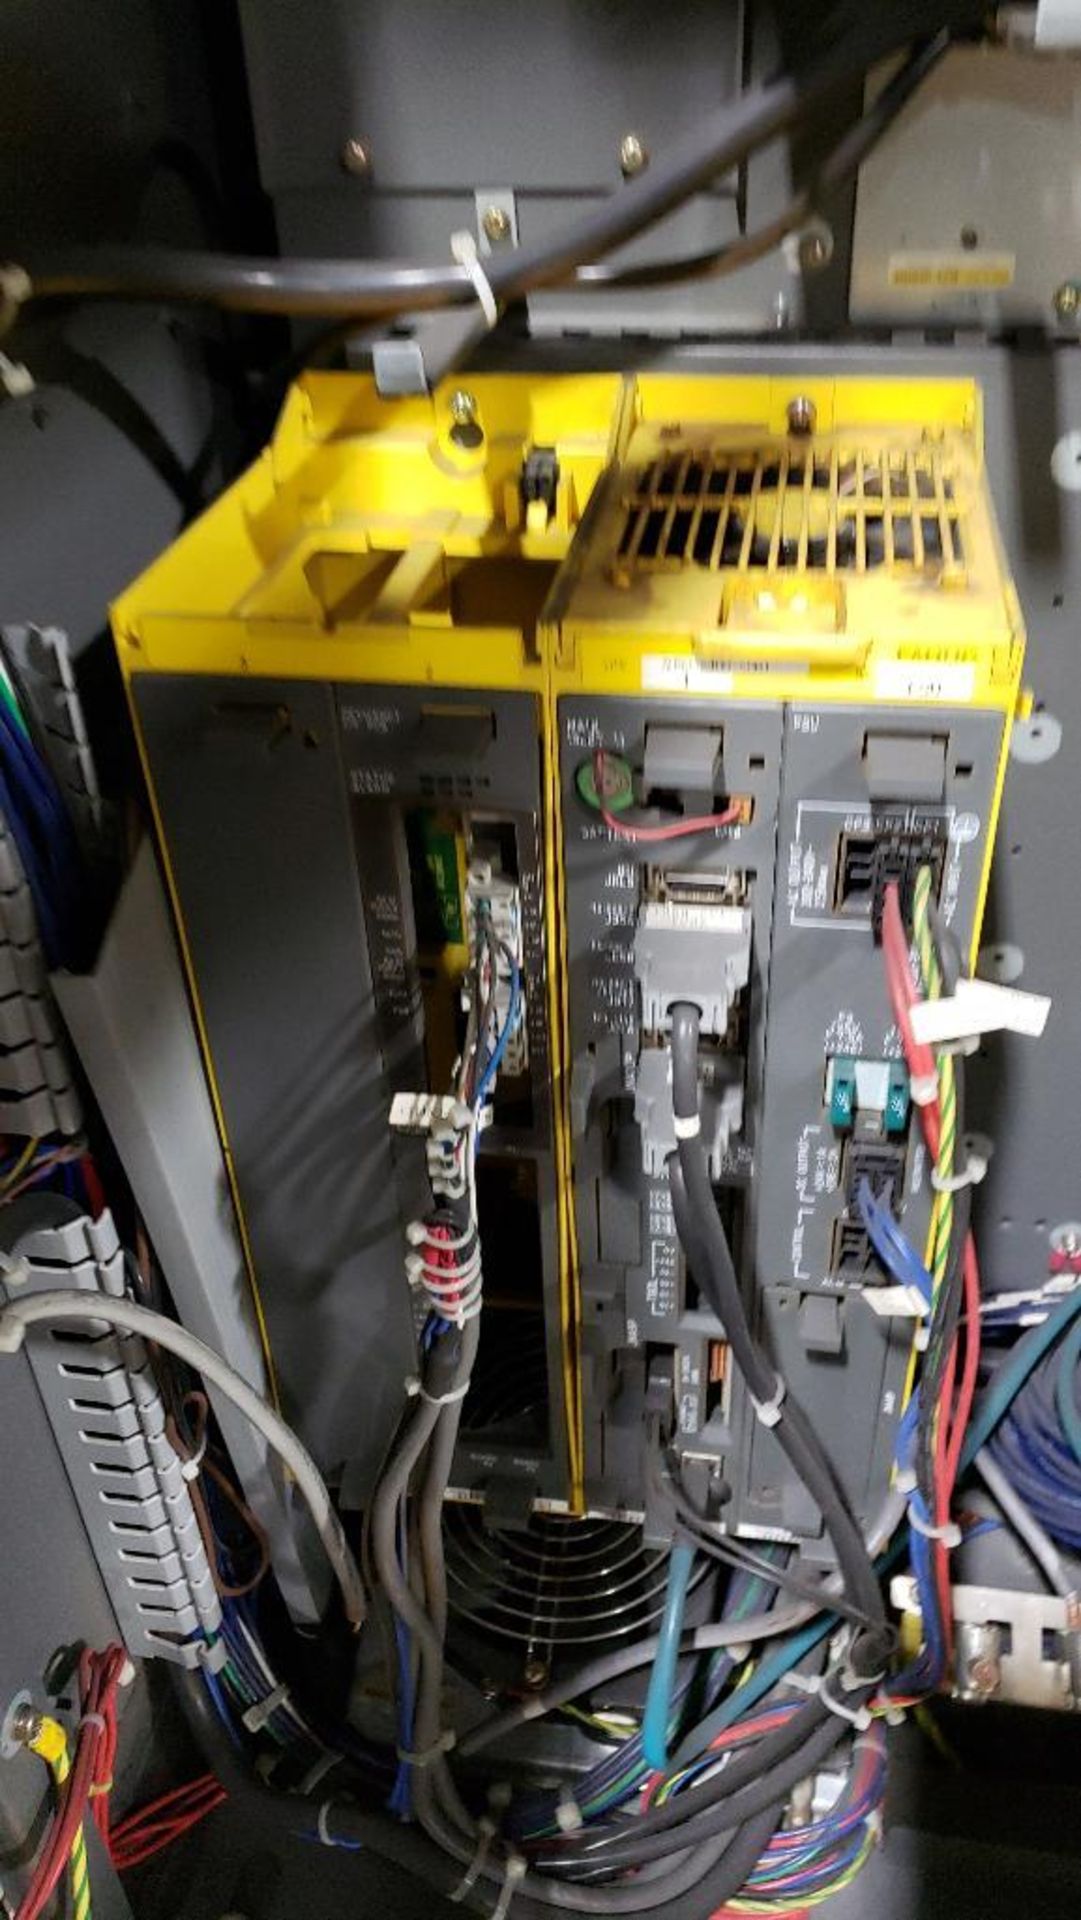 Fanuc R-2000iA/165F robot with Fanuc System R-J3iB controller. - Image 13 of 13